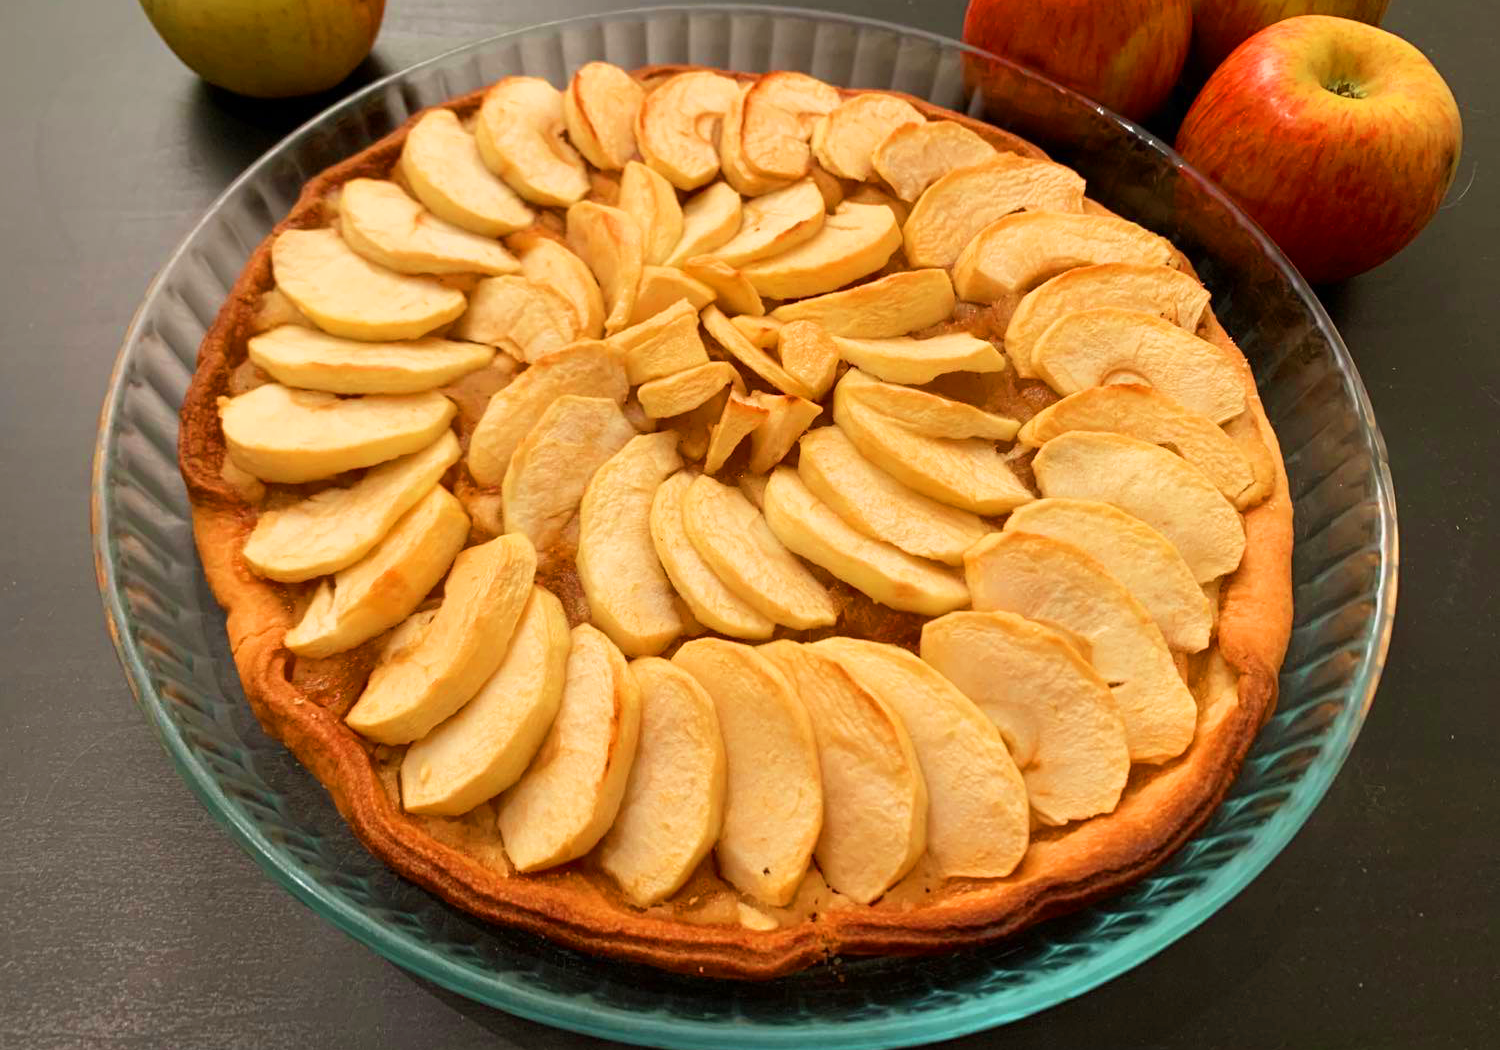 You are currently viewing Tarte aux pommes